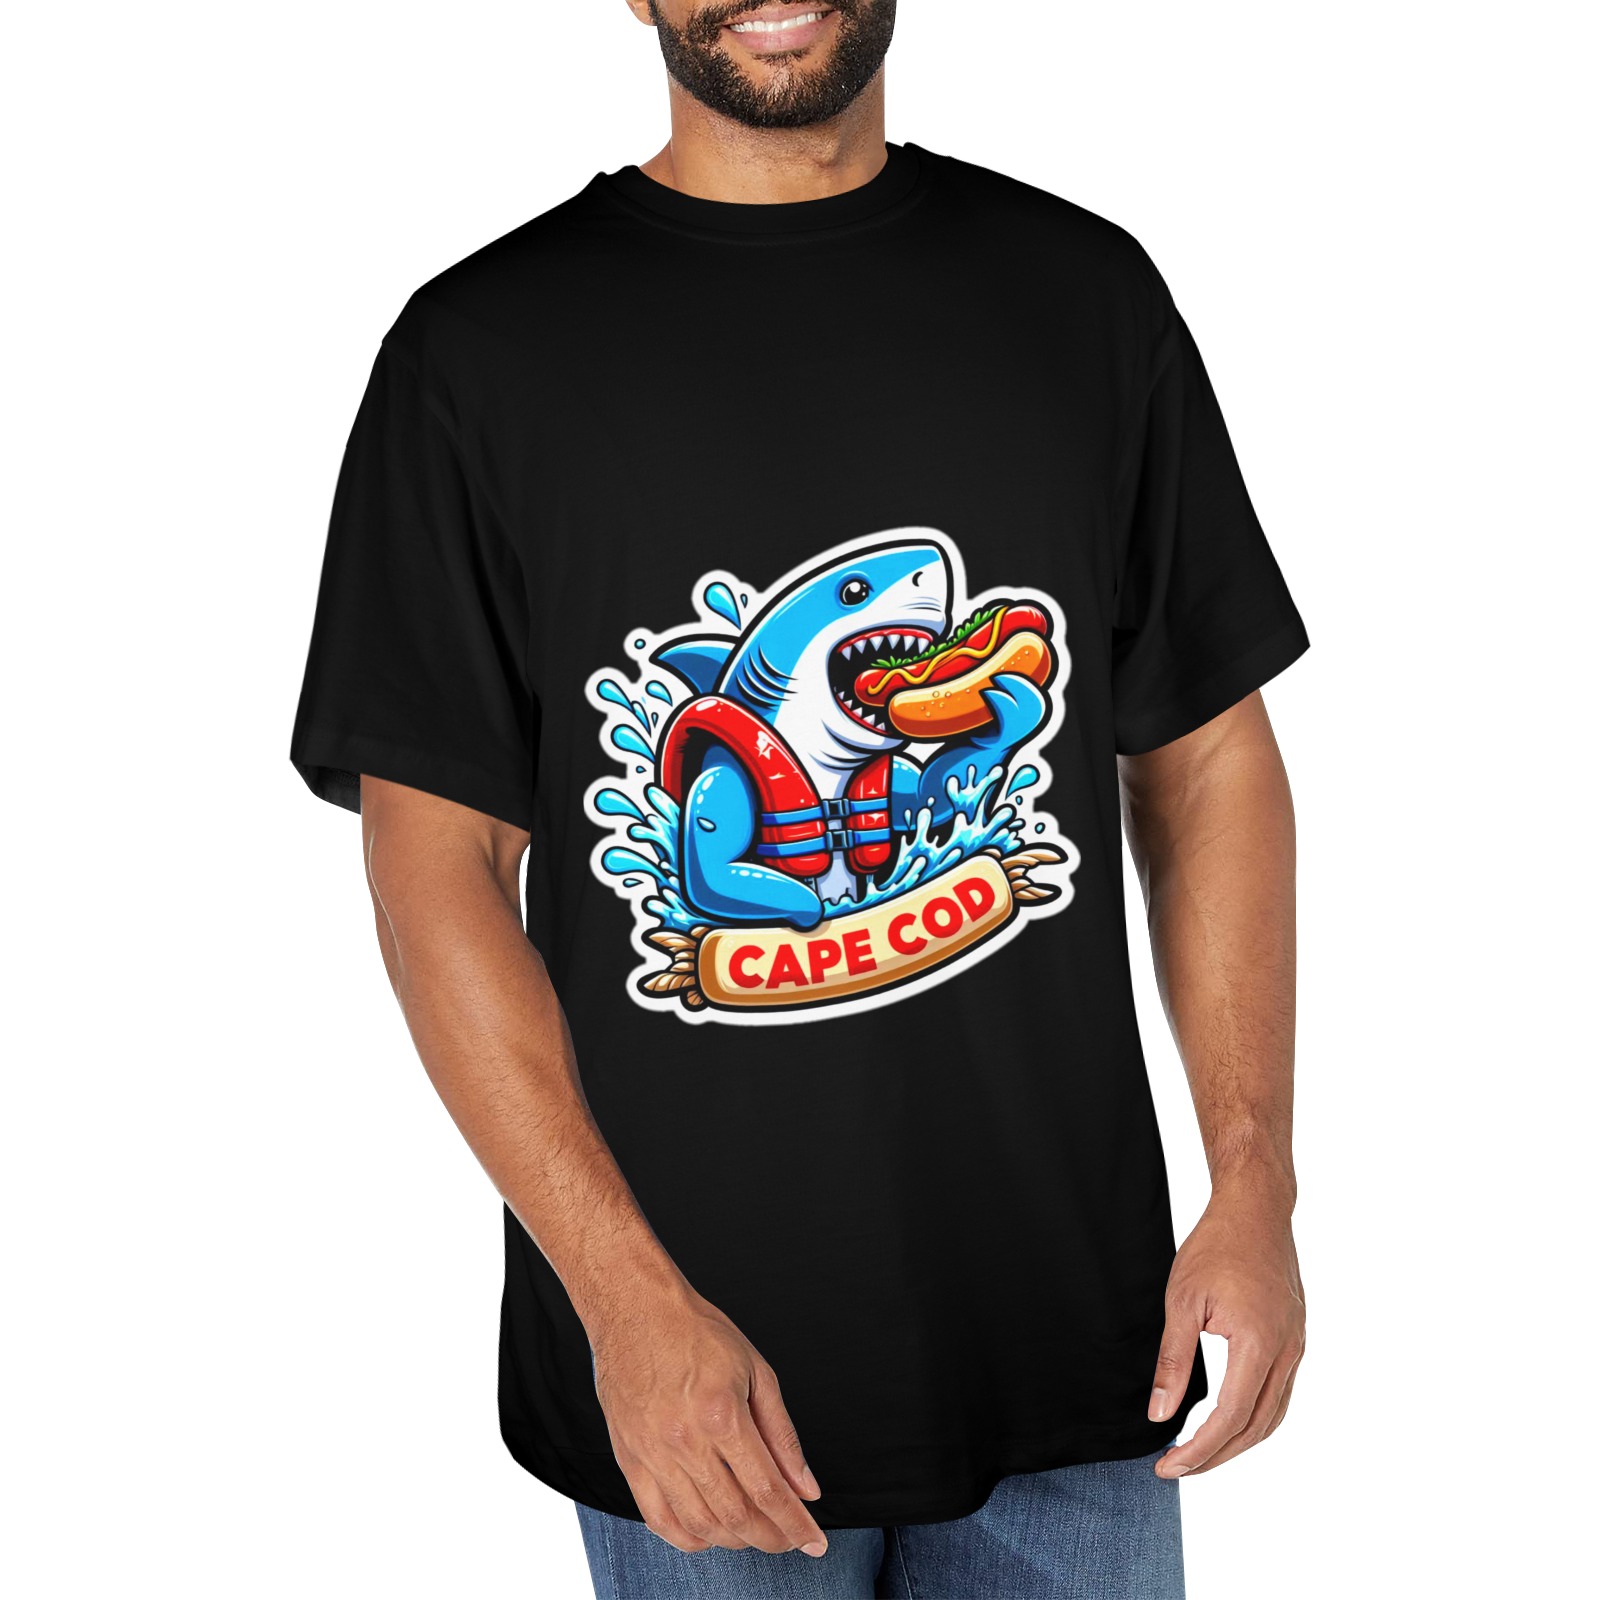 CAPE COD-GREAT WHITE EATING HOT DOG 2 Men's Glow in the Dark T-shirt (Two Sides Printing)